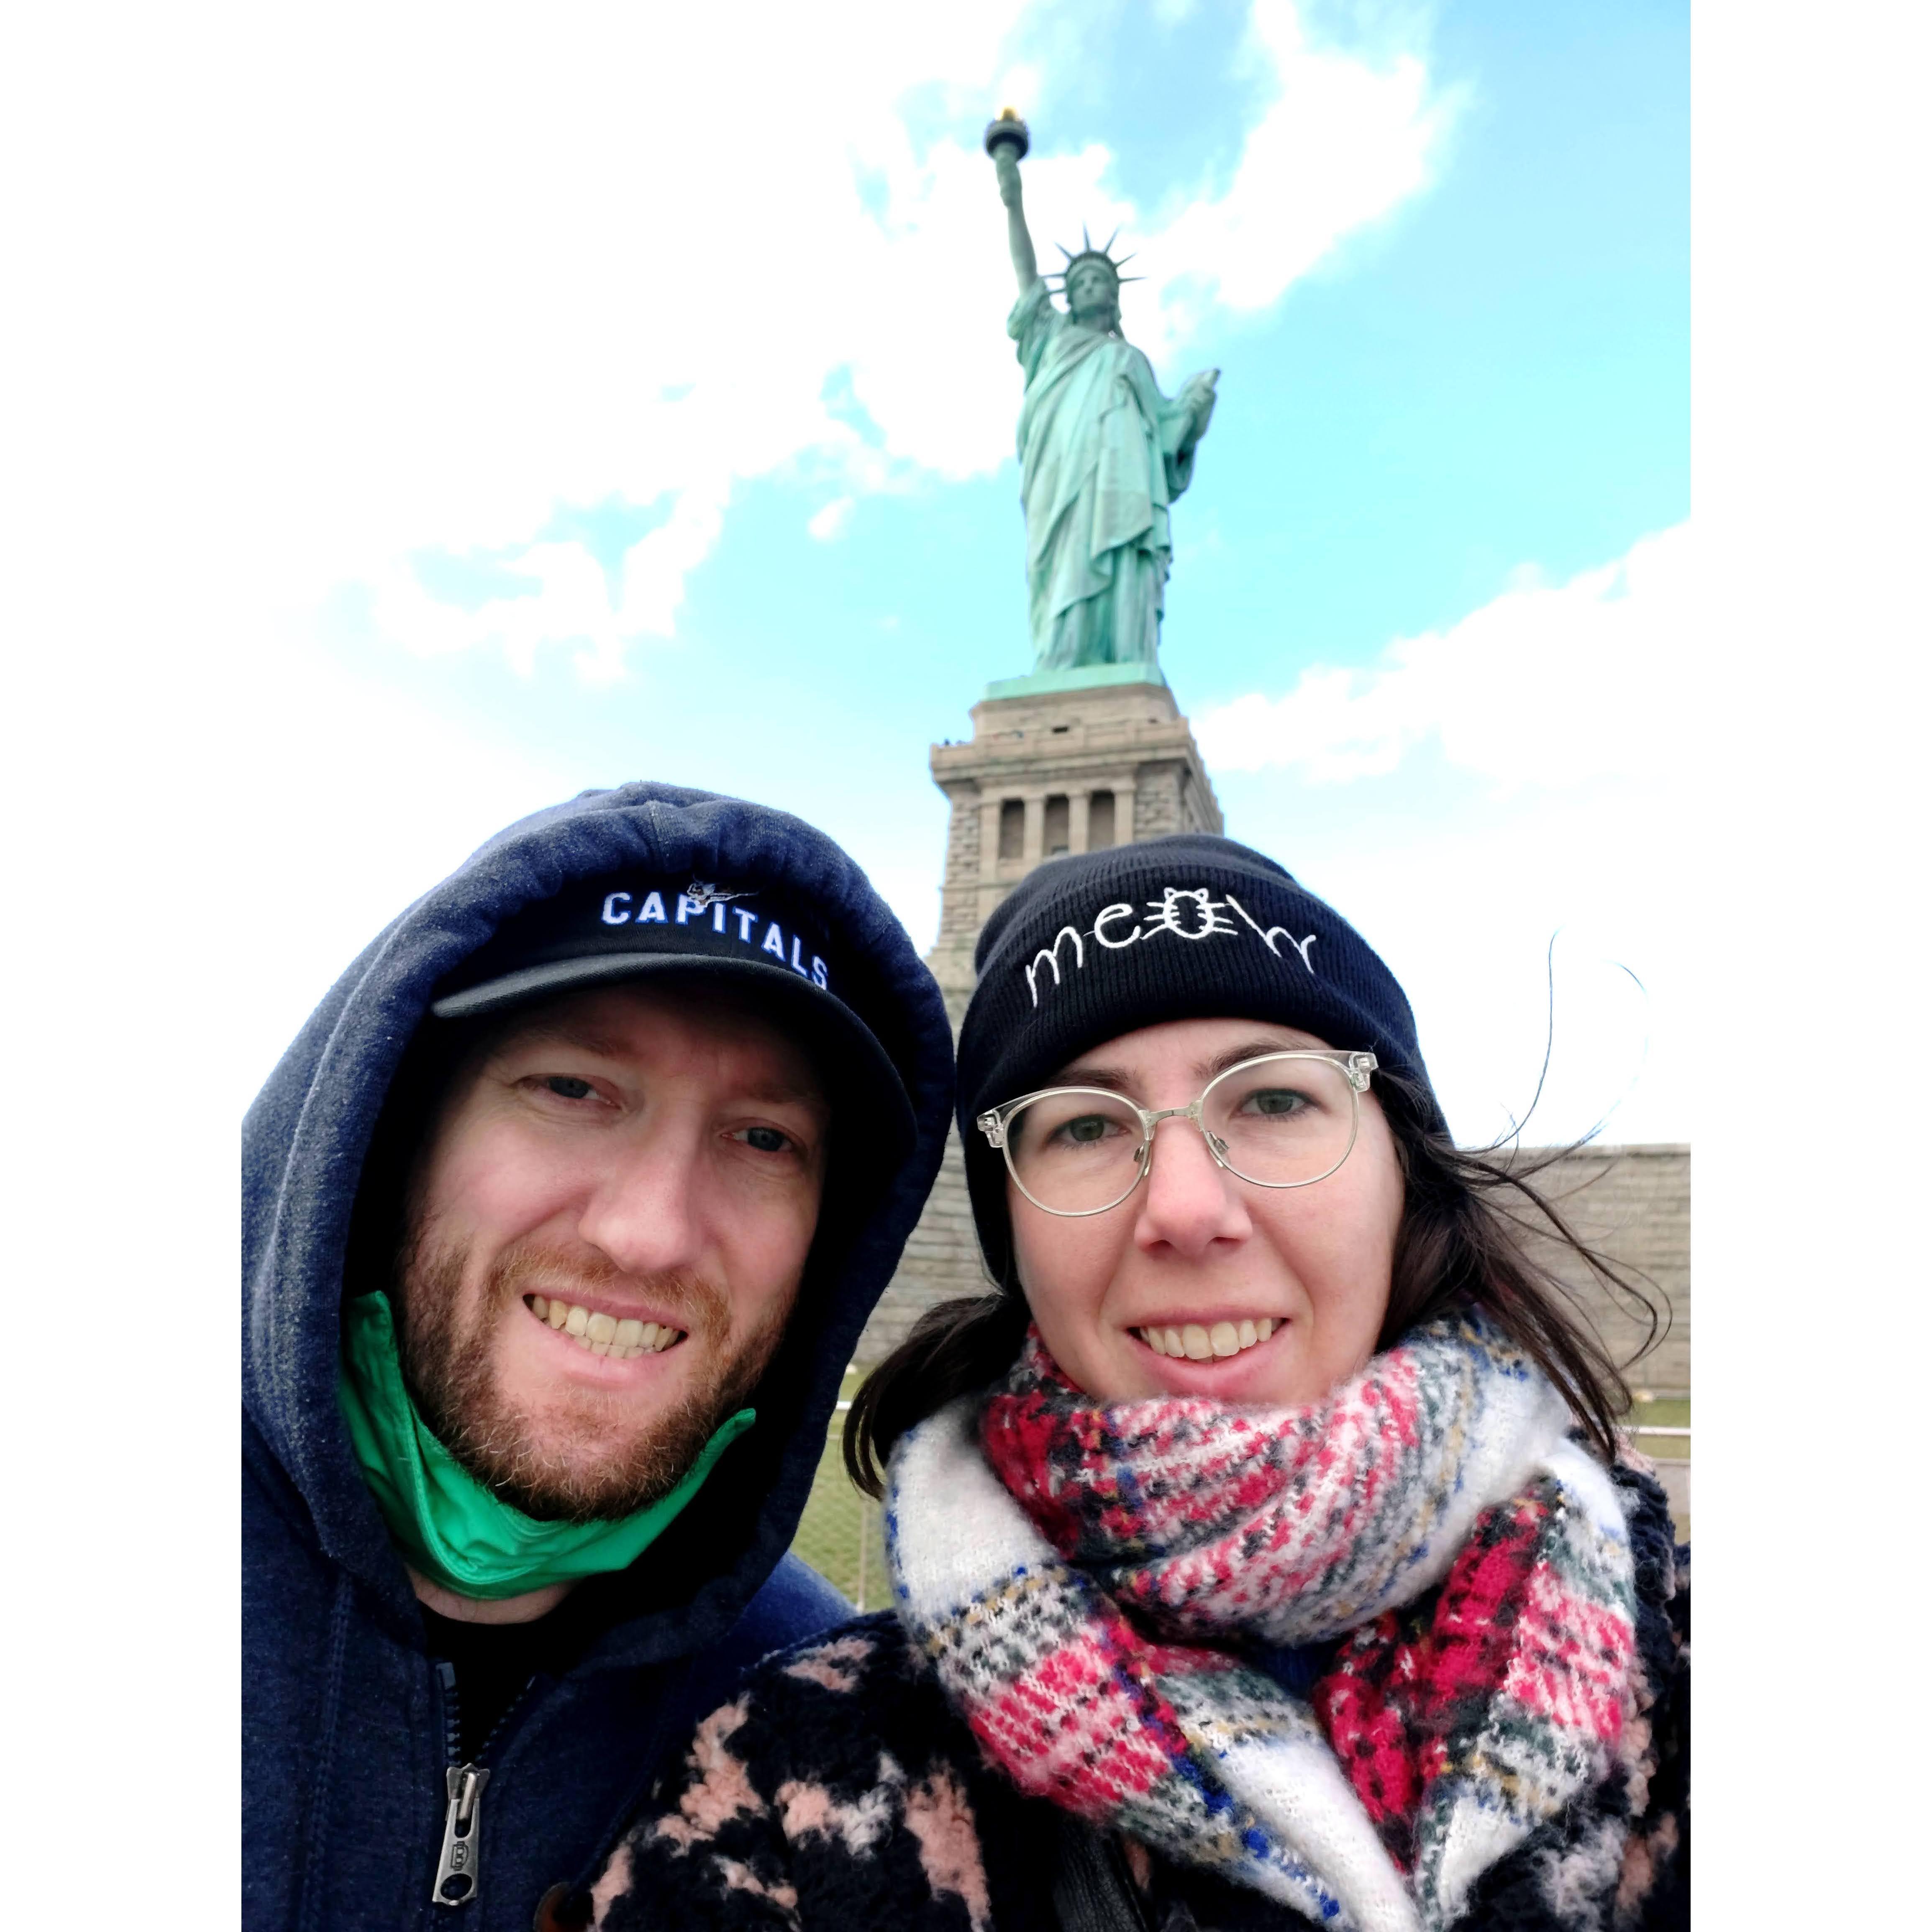 2022, Pete's first time to the Statue of Liberty.